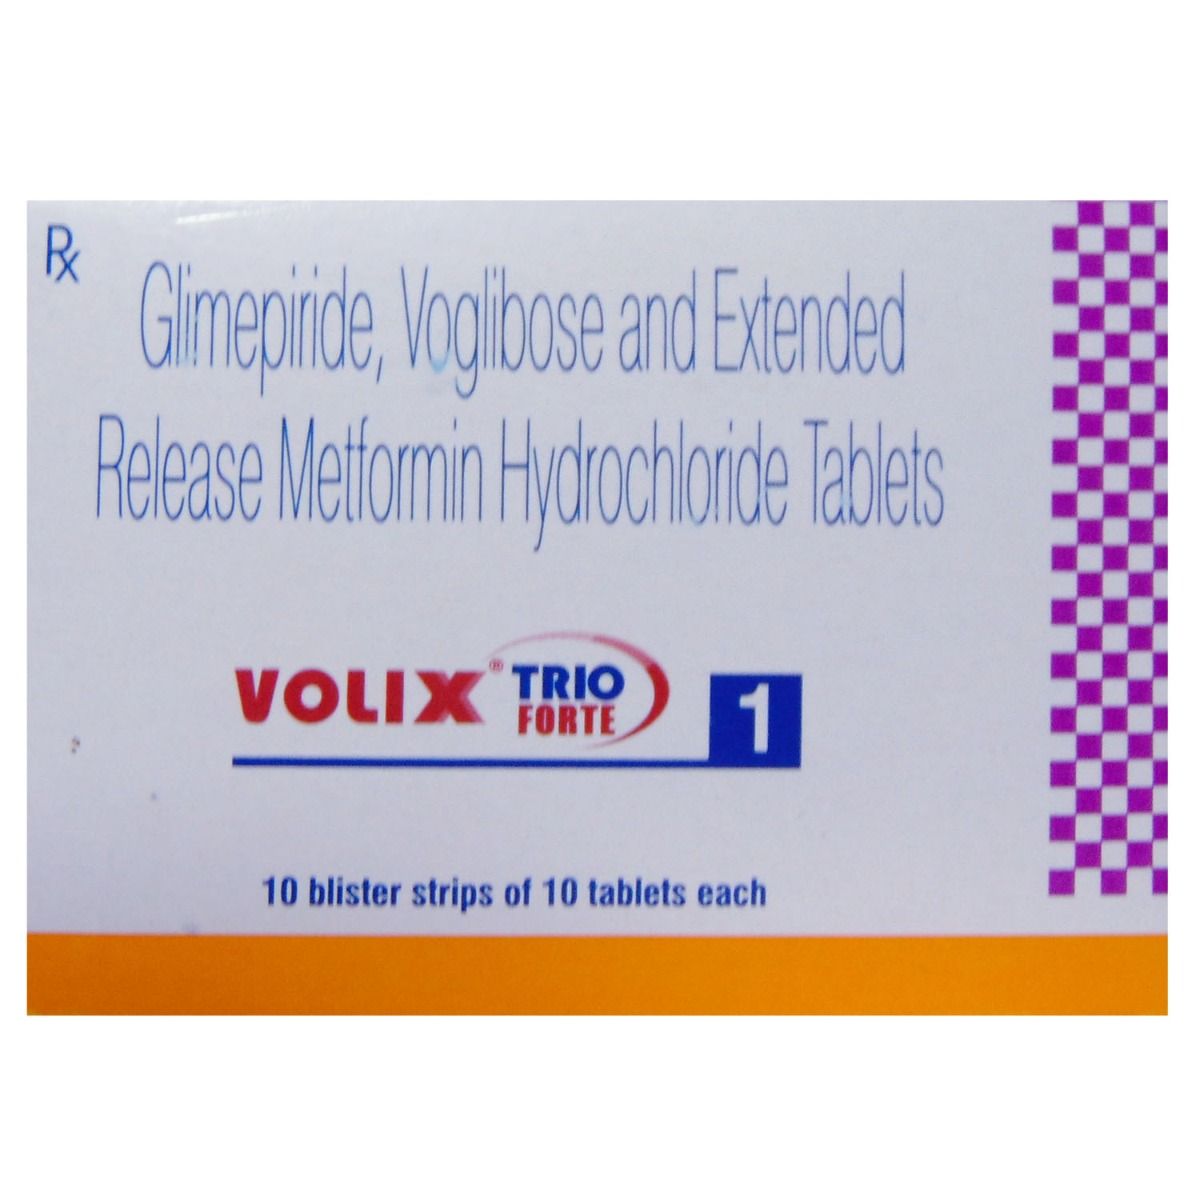 VOLIX TRIO FORTE 1MG TABLET, Pack of 10 TABLETS